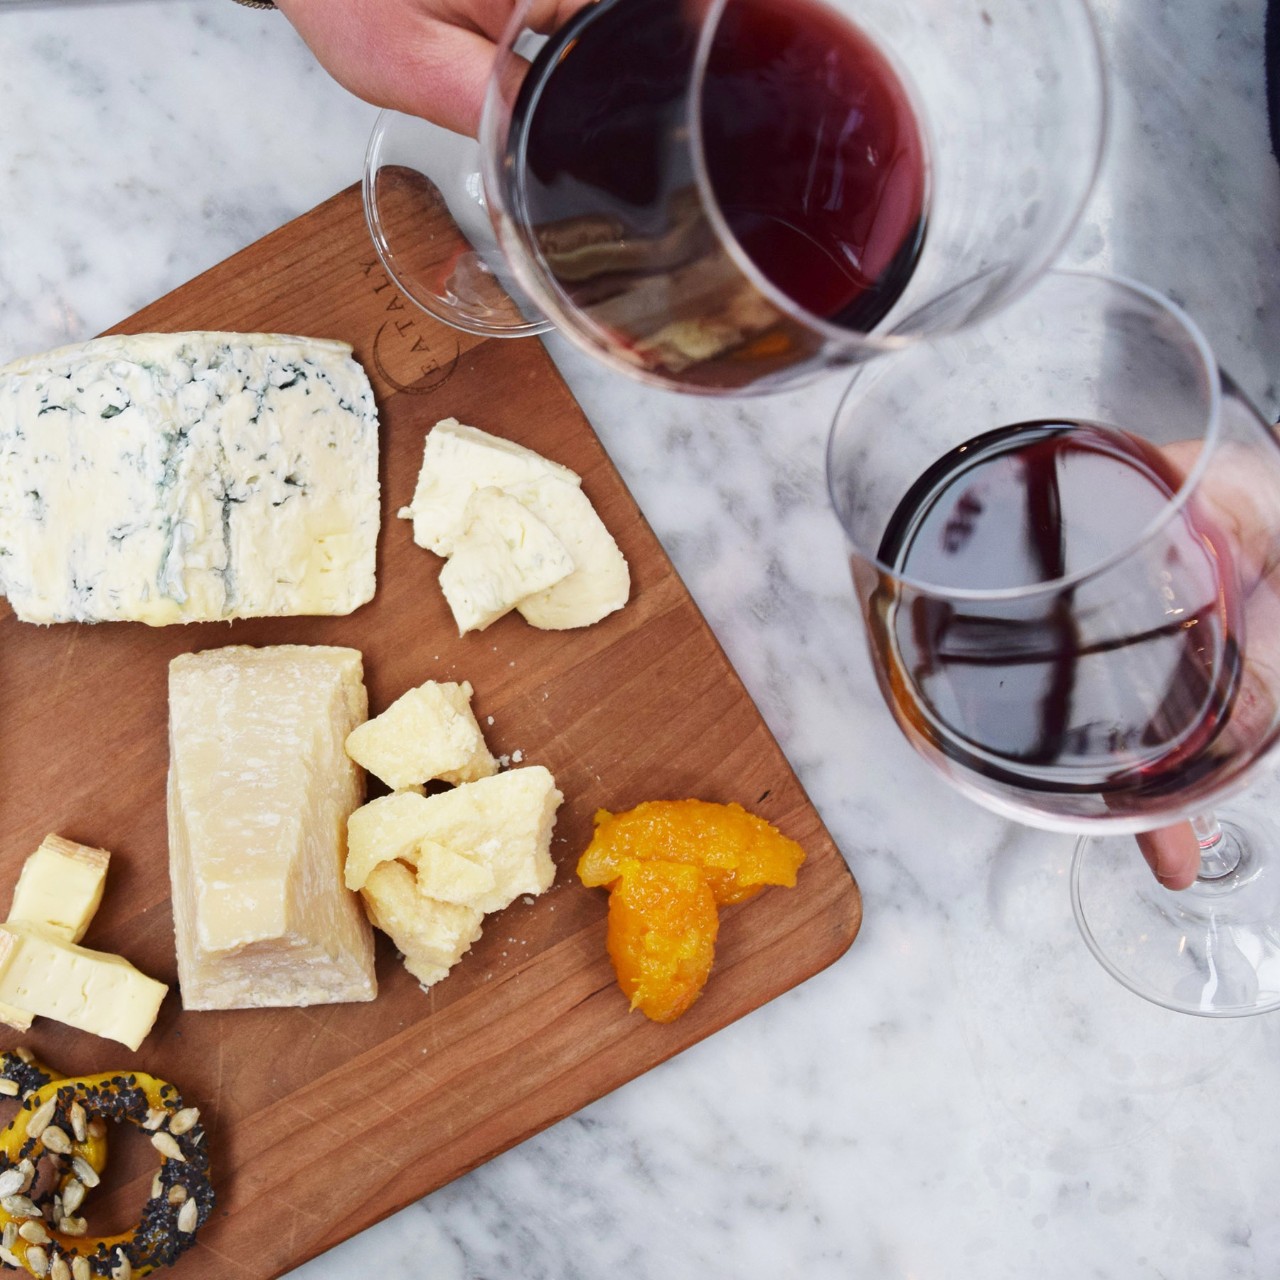 Patrons clink wine glasses and enjoy a cheeseboard at Eataly World Trade Center